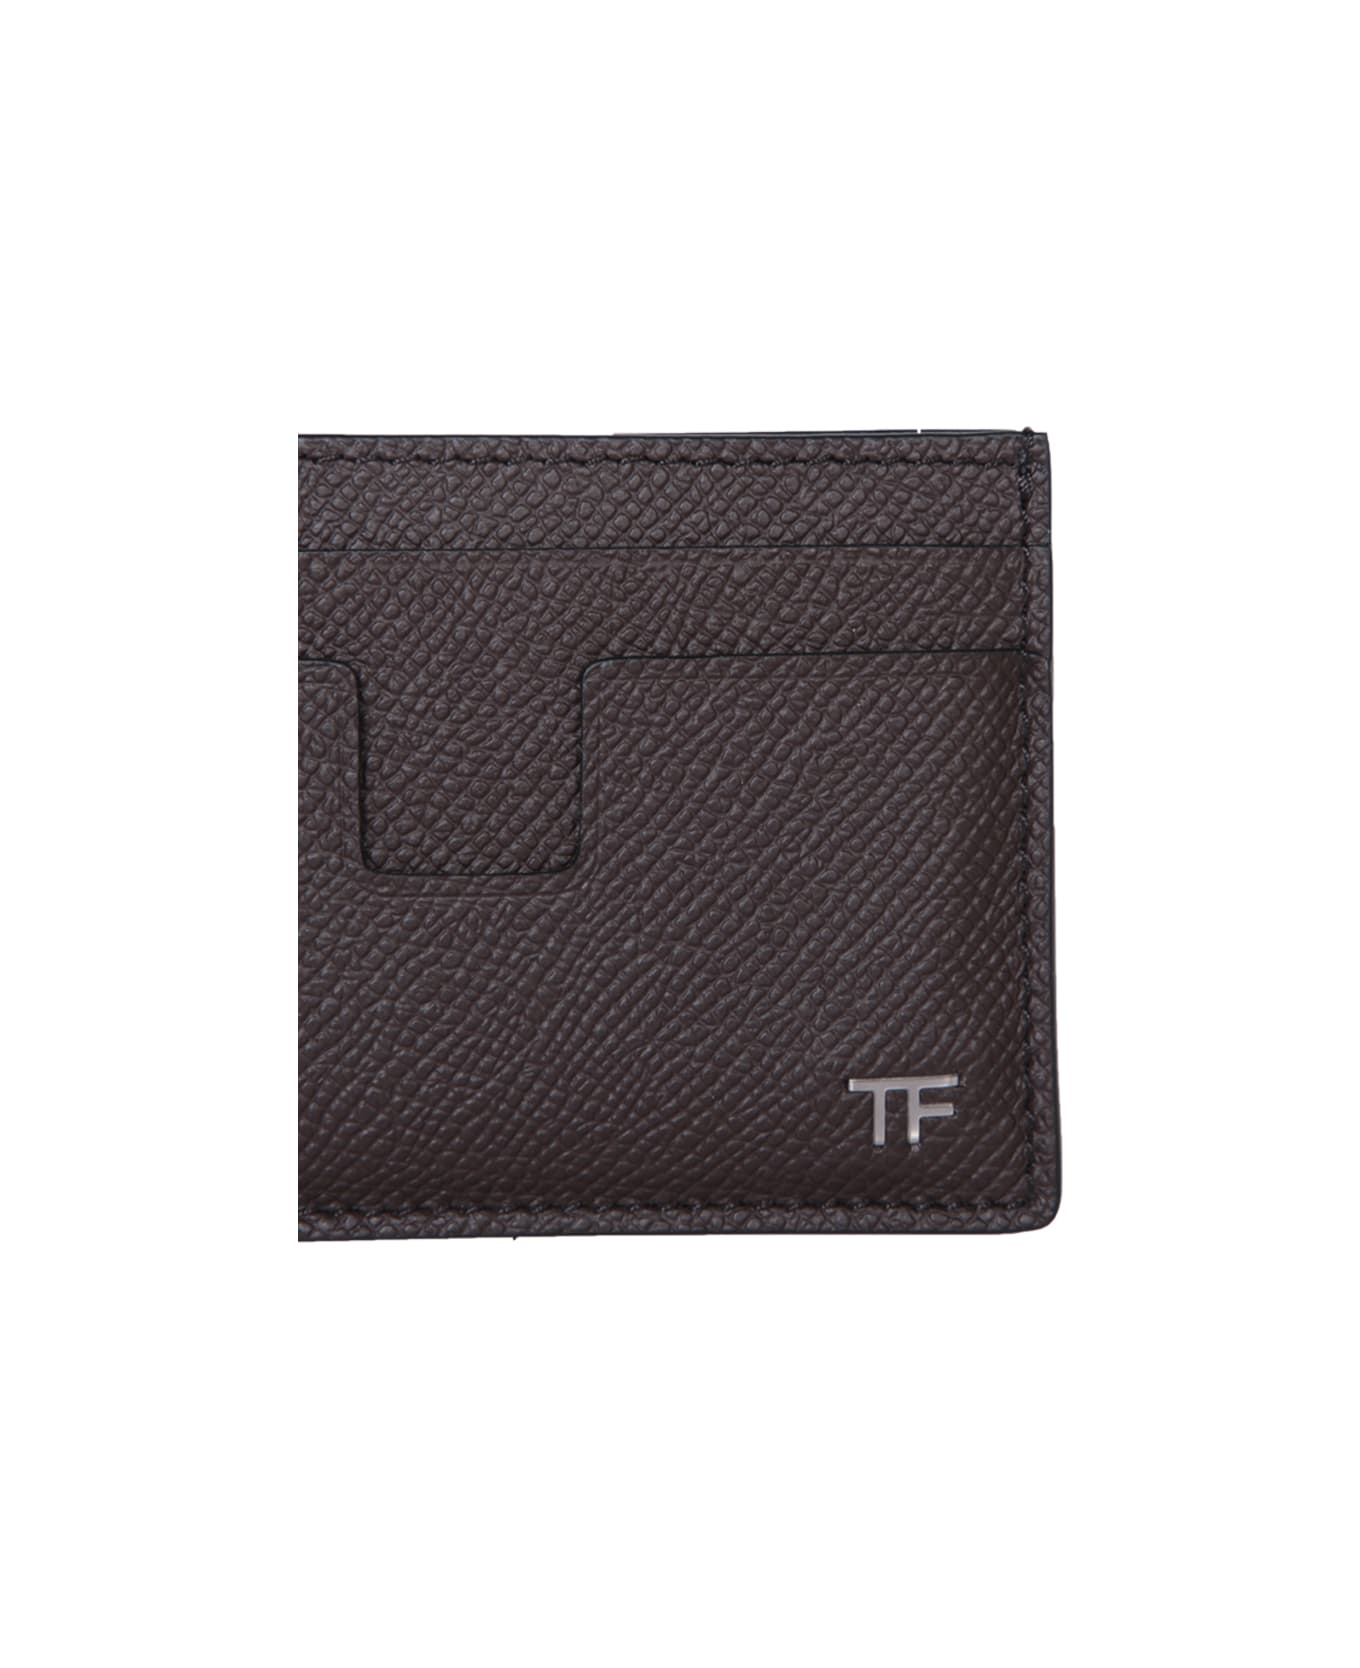 Tom Ford Logo Plaque Classic Credit Card Holder - Chocolate